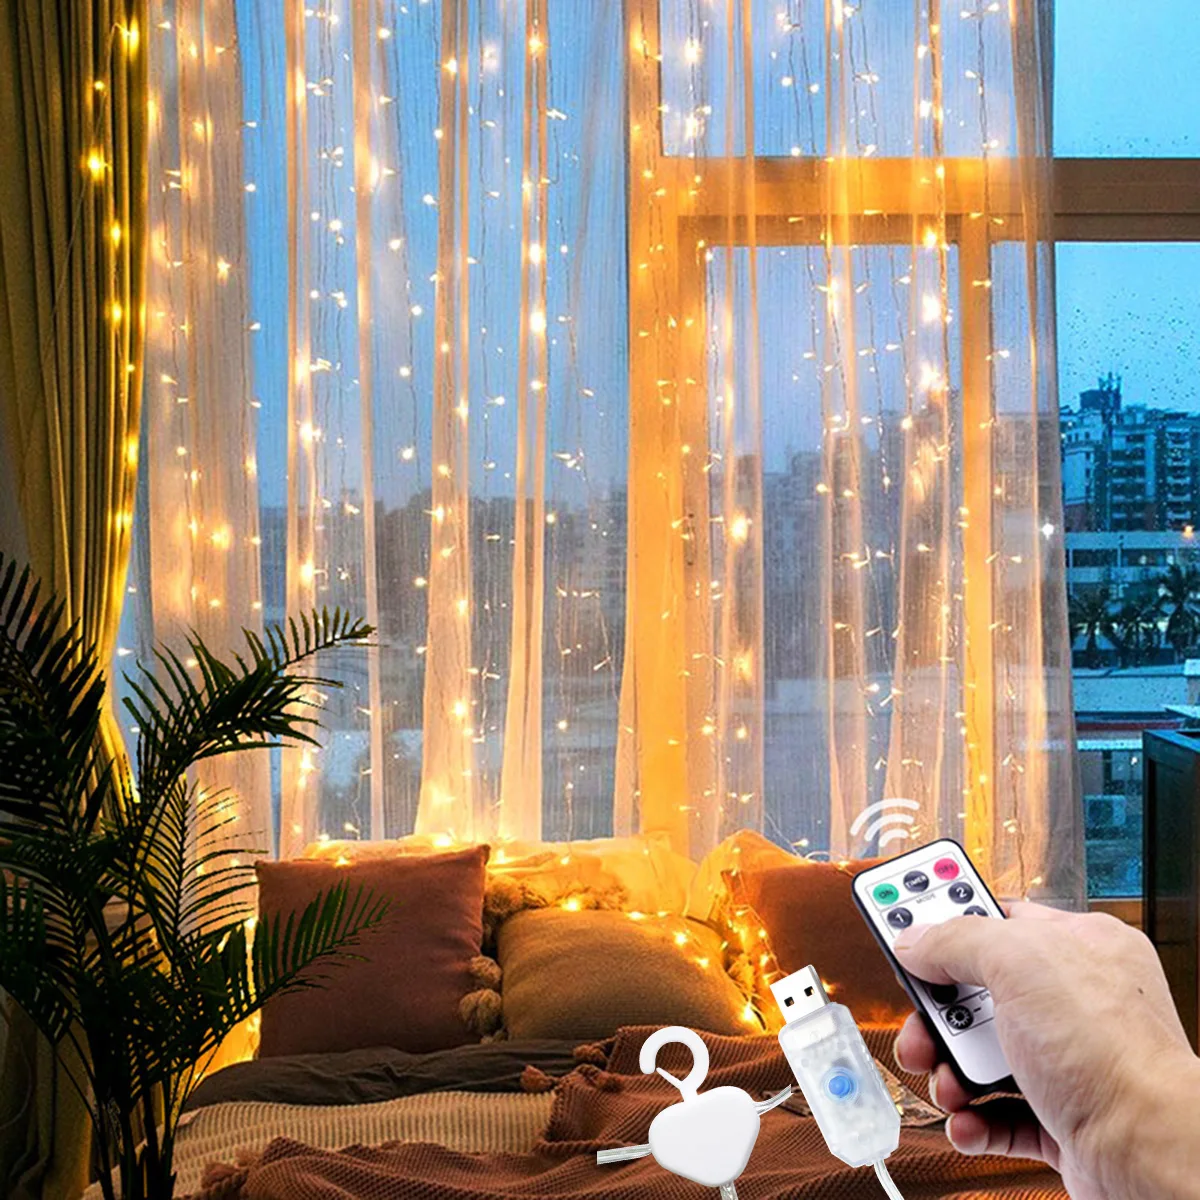 1M-3M LED Curtain String Lights Hanging Wedding Party Home Bedroom Decor 8